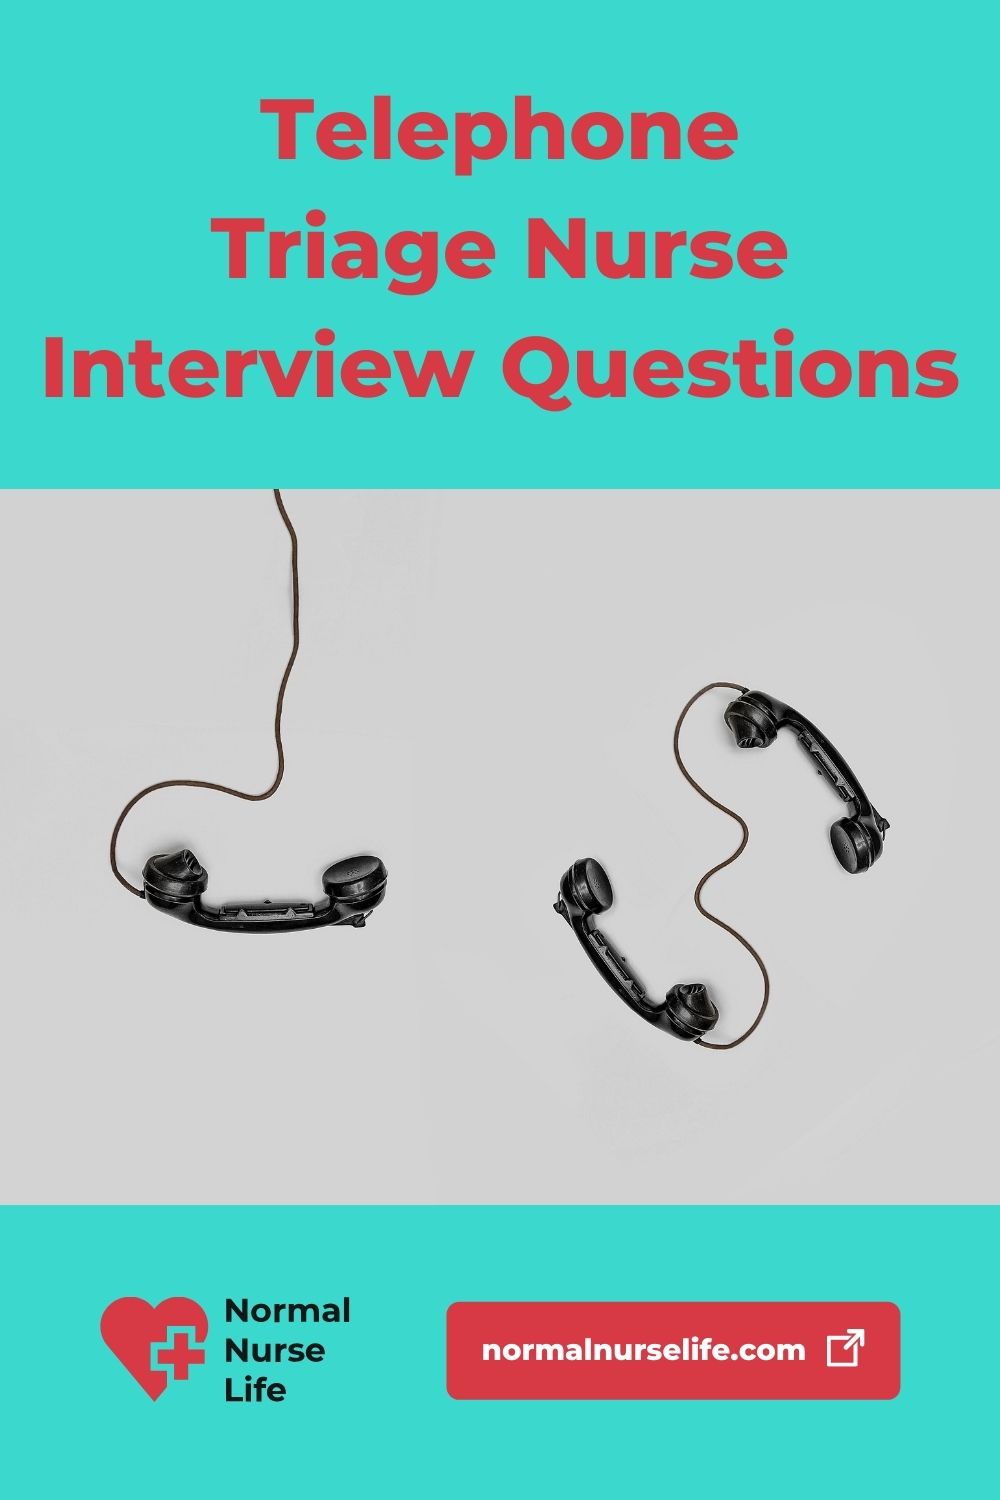 Interview questions for telephone triage nurses